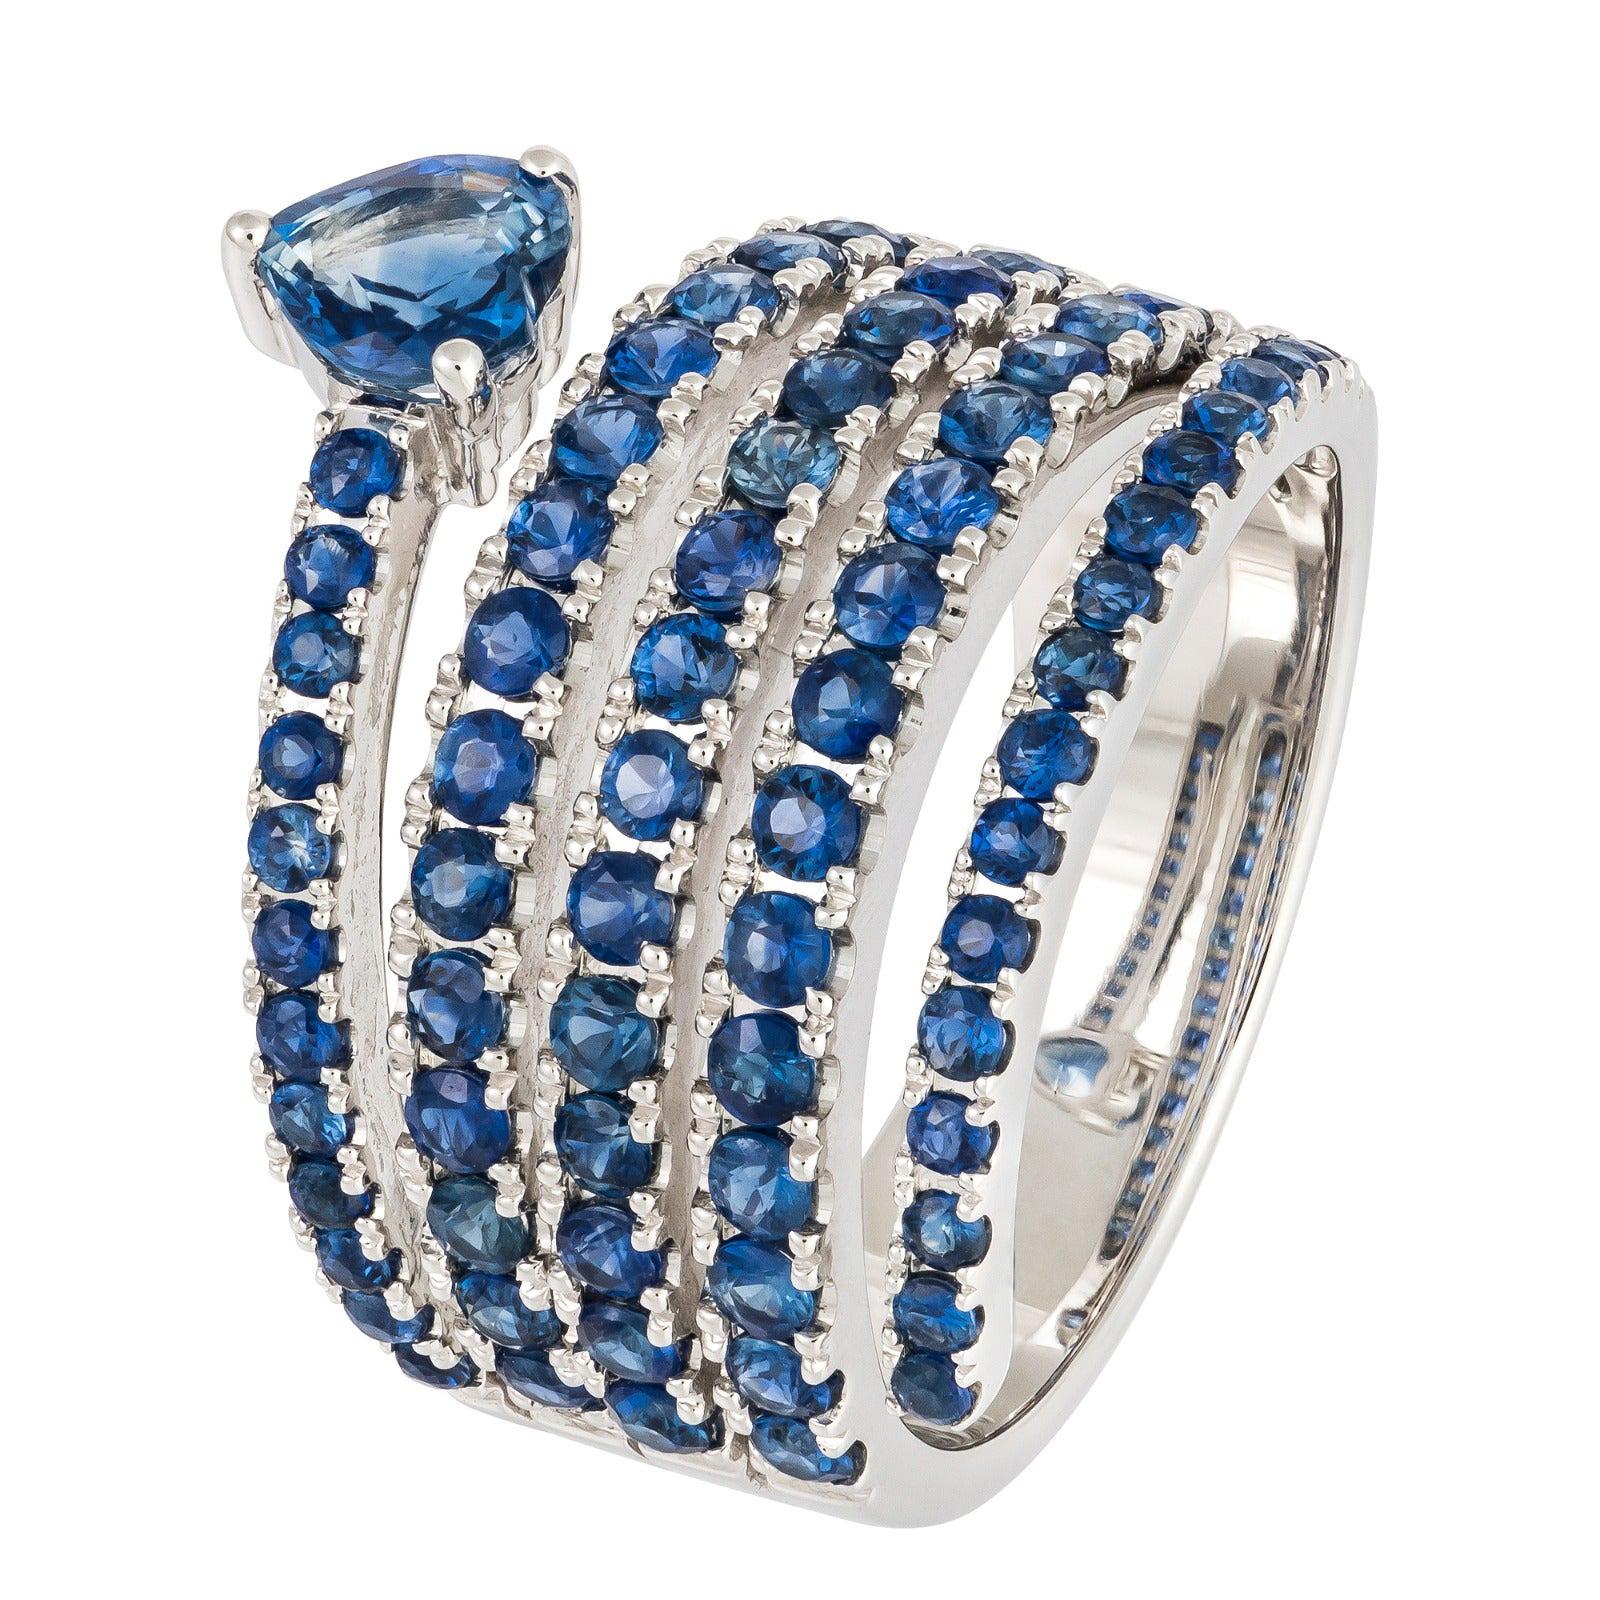 Fashionable and Stylish Blue Sapphire White Gold Statement Ring for Her For Sale